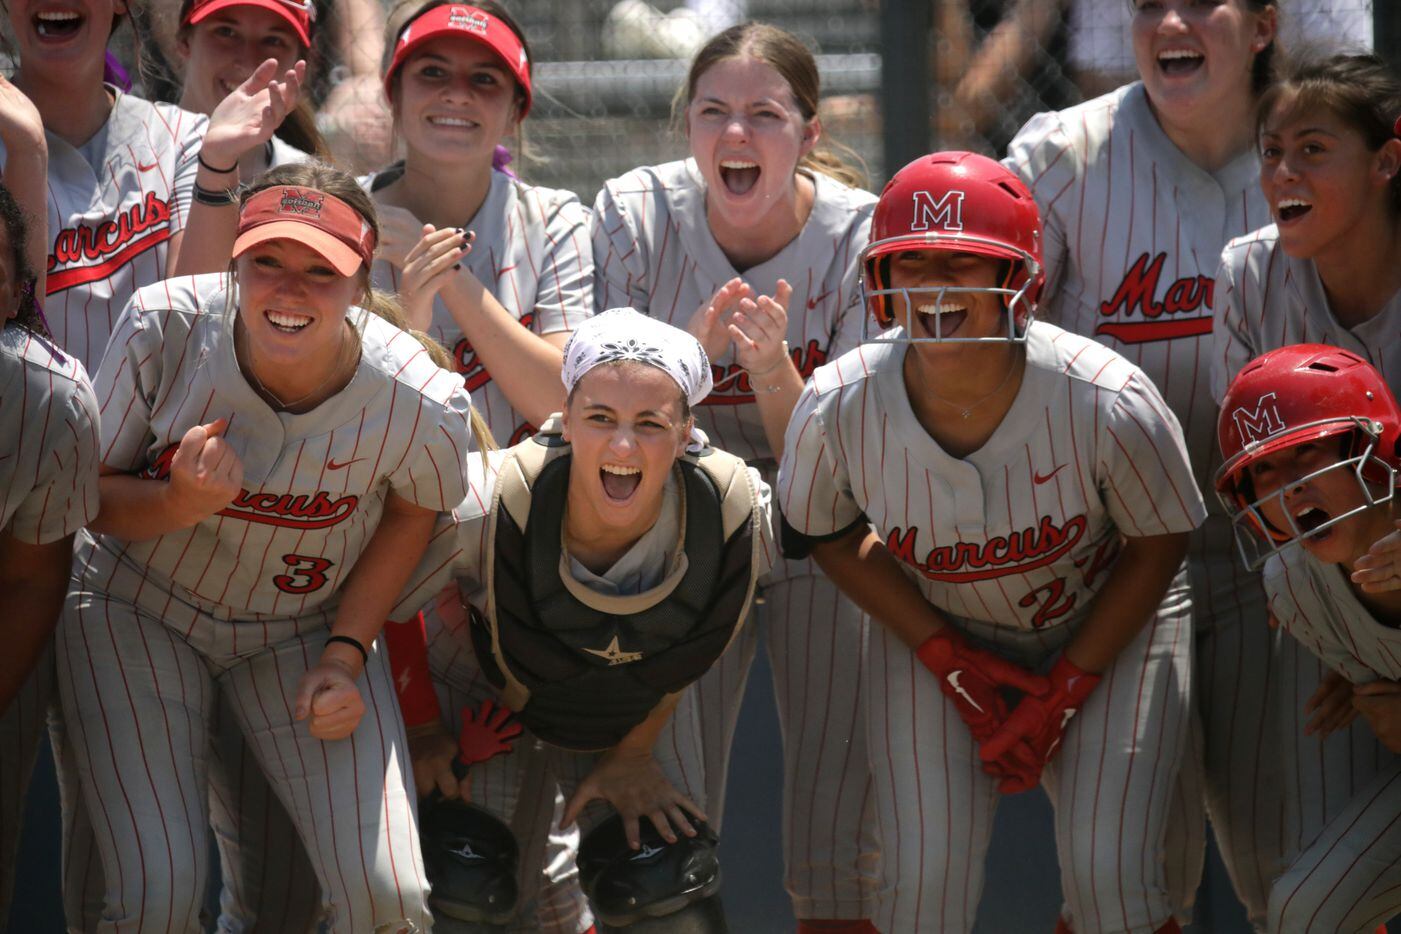 The team waits at home plate as Flower Mound Marcus High School player #2, Makayla Dudley,...